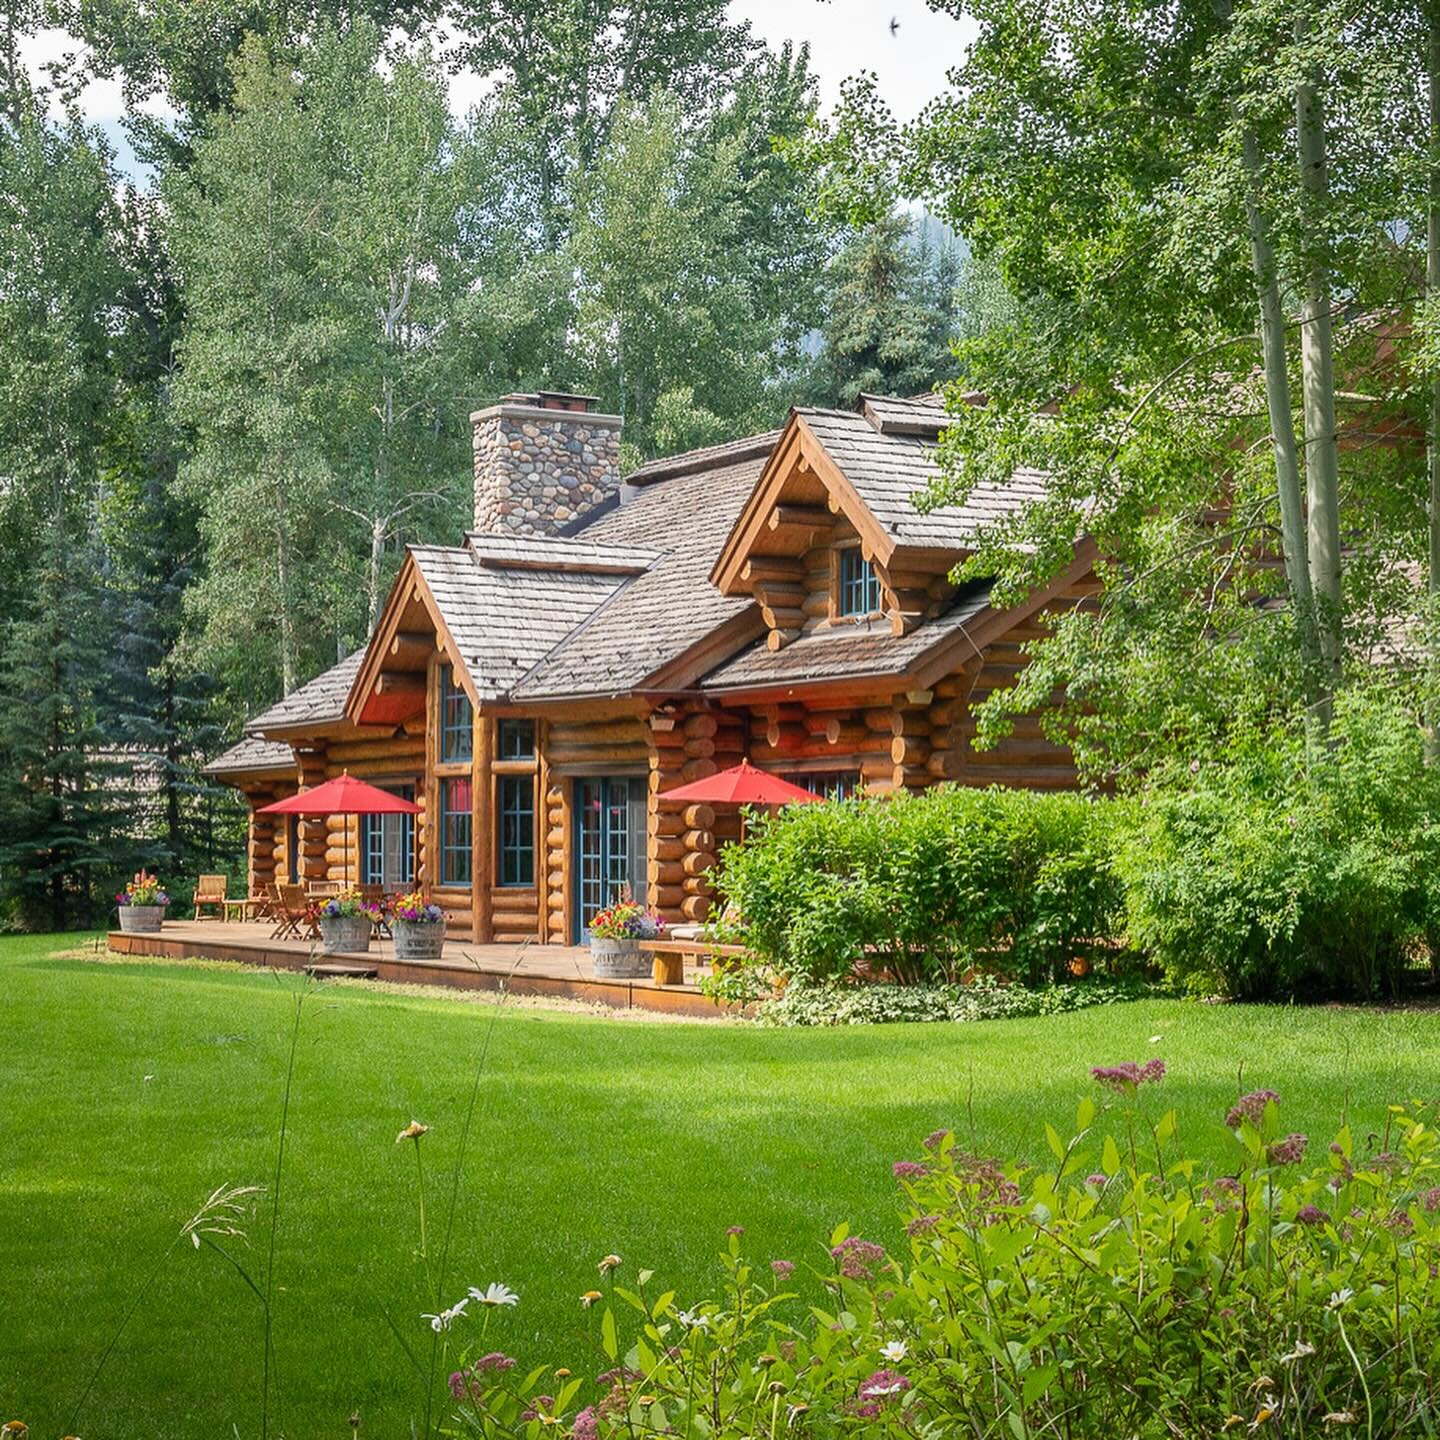 M&eacute;tier Maison Monday | Sun Valley, Idaho

This quintessential lodge-style home is situated on 1.95 acres on the Bigwood River in Sun Valley, Idaho. Thoughtfully designed for comfortable living and entertaining, this home features a dramatic fl